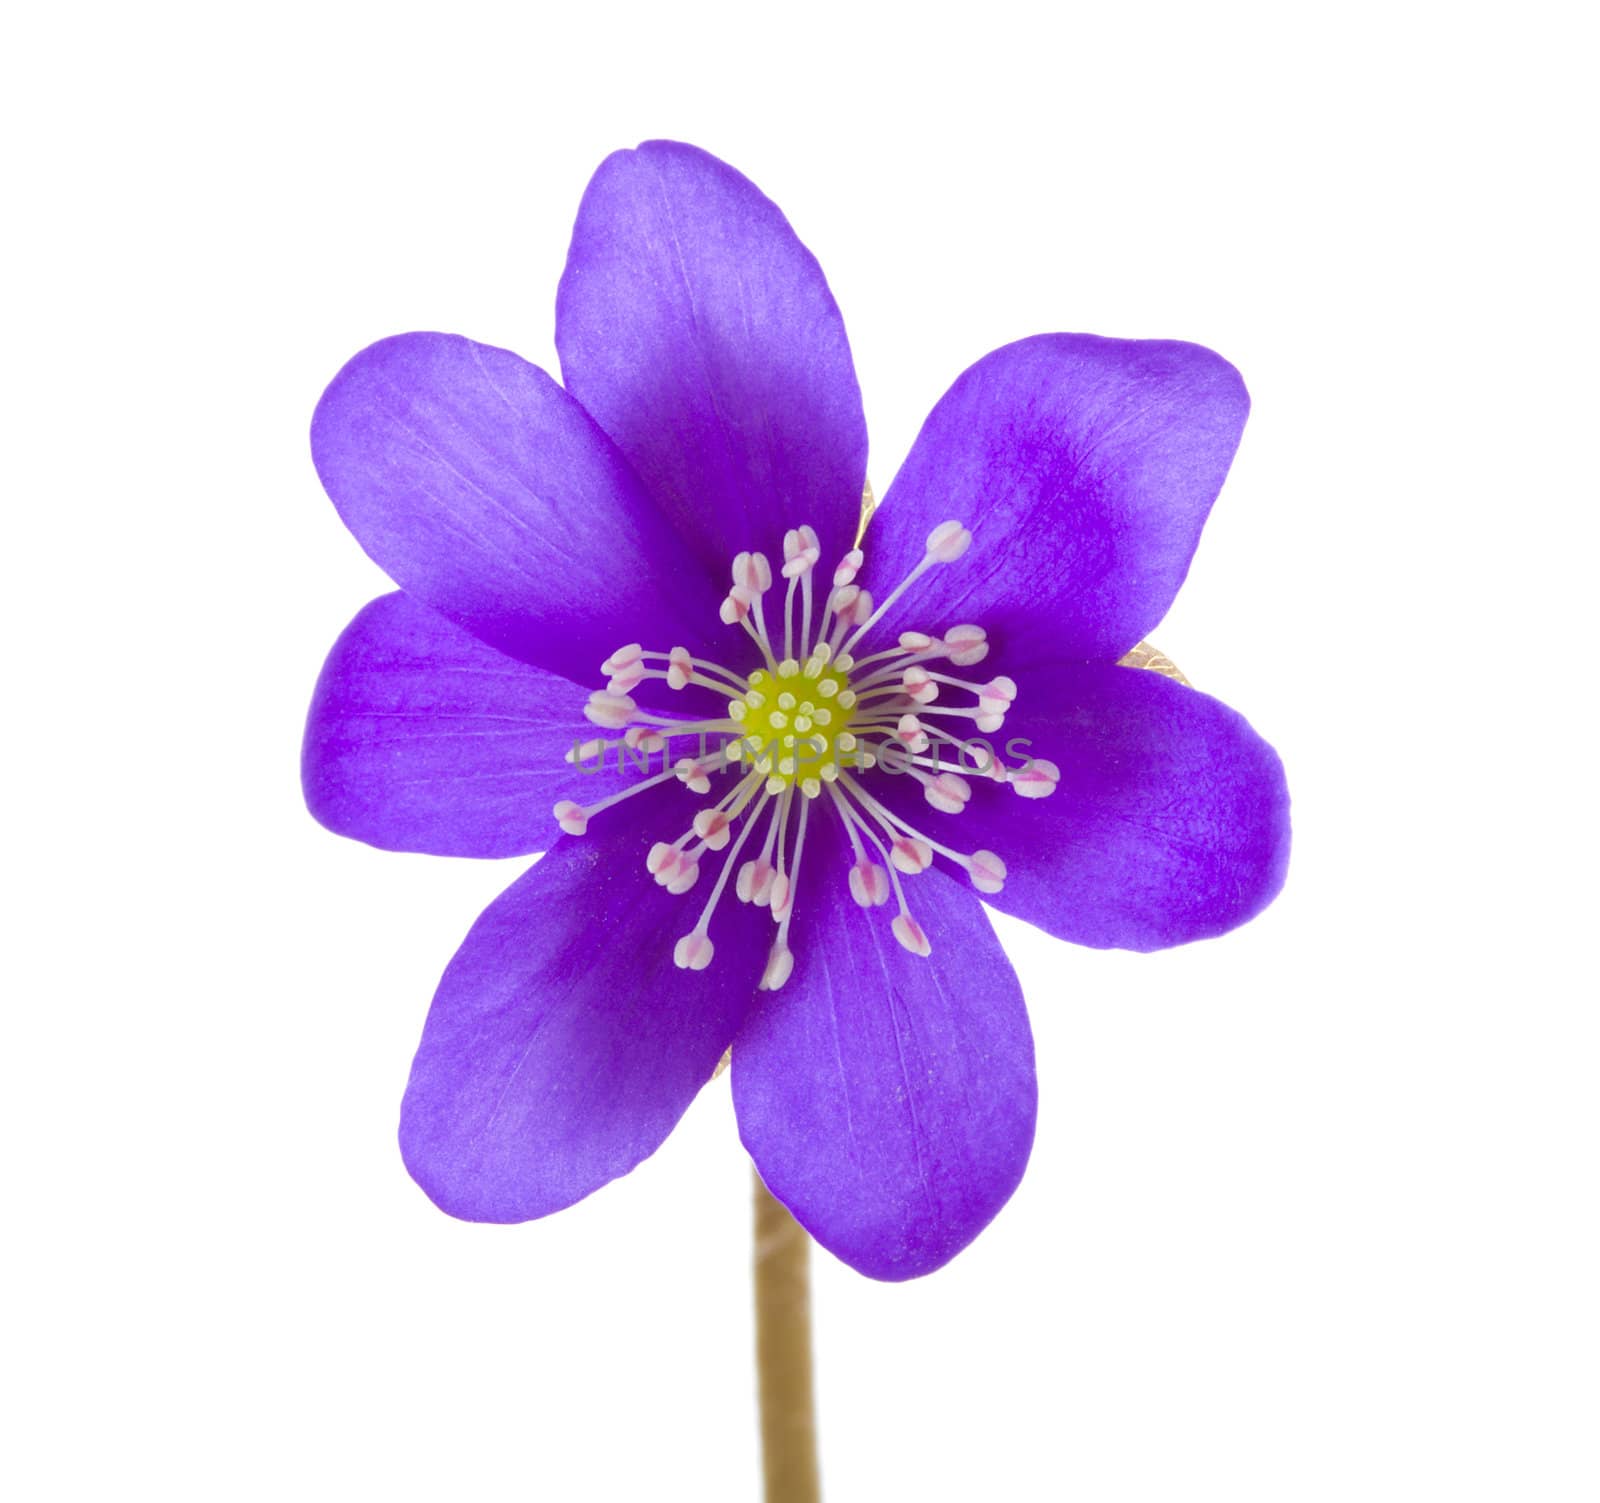 close-up hepatica flower, isolated on white